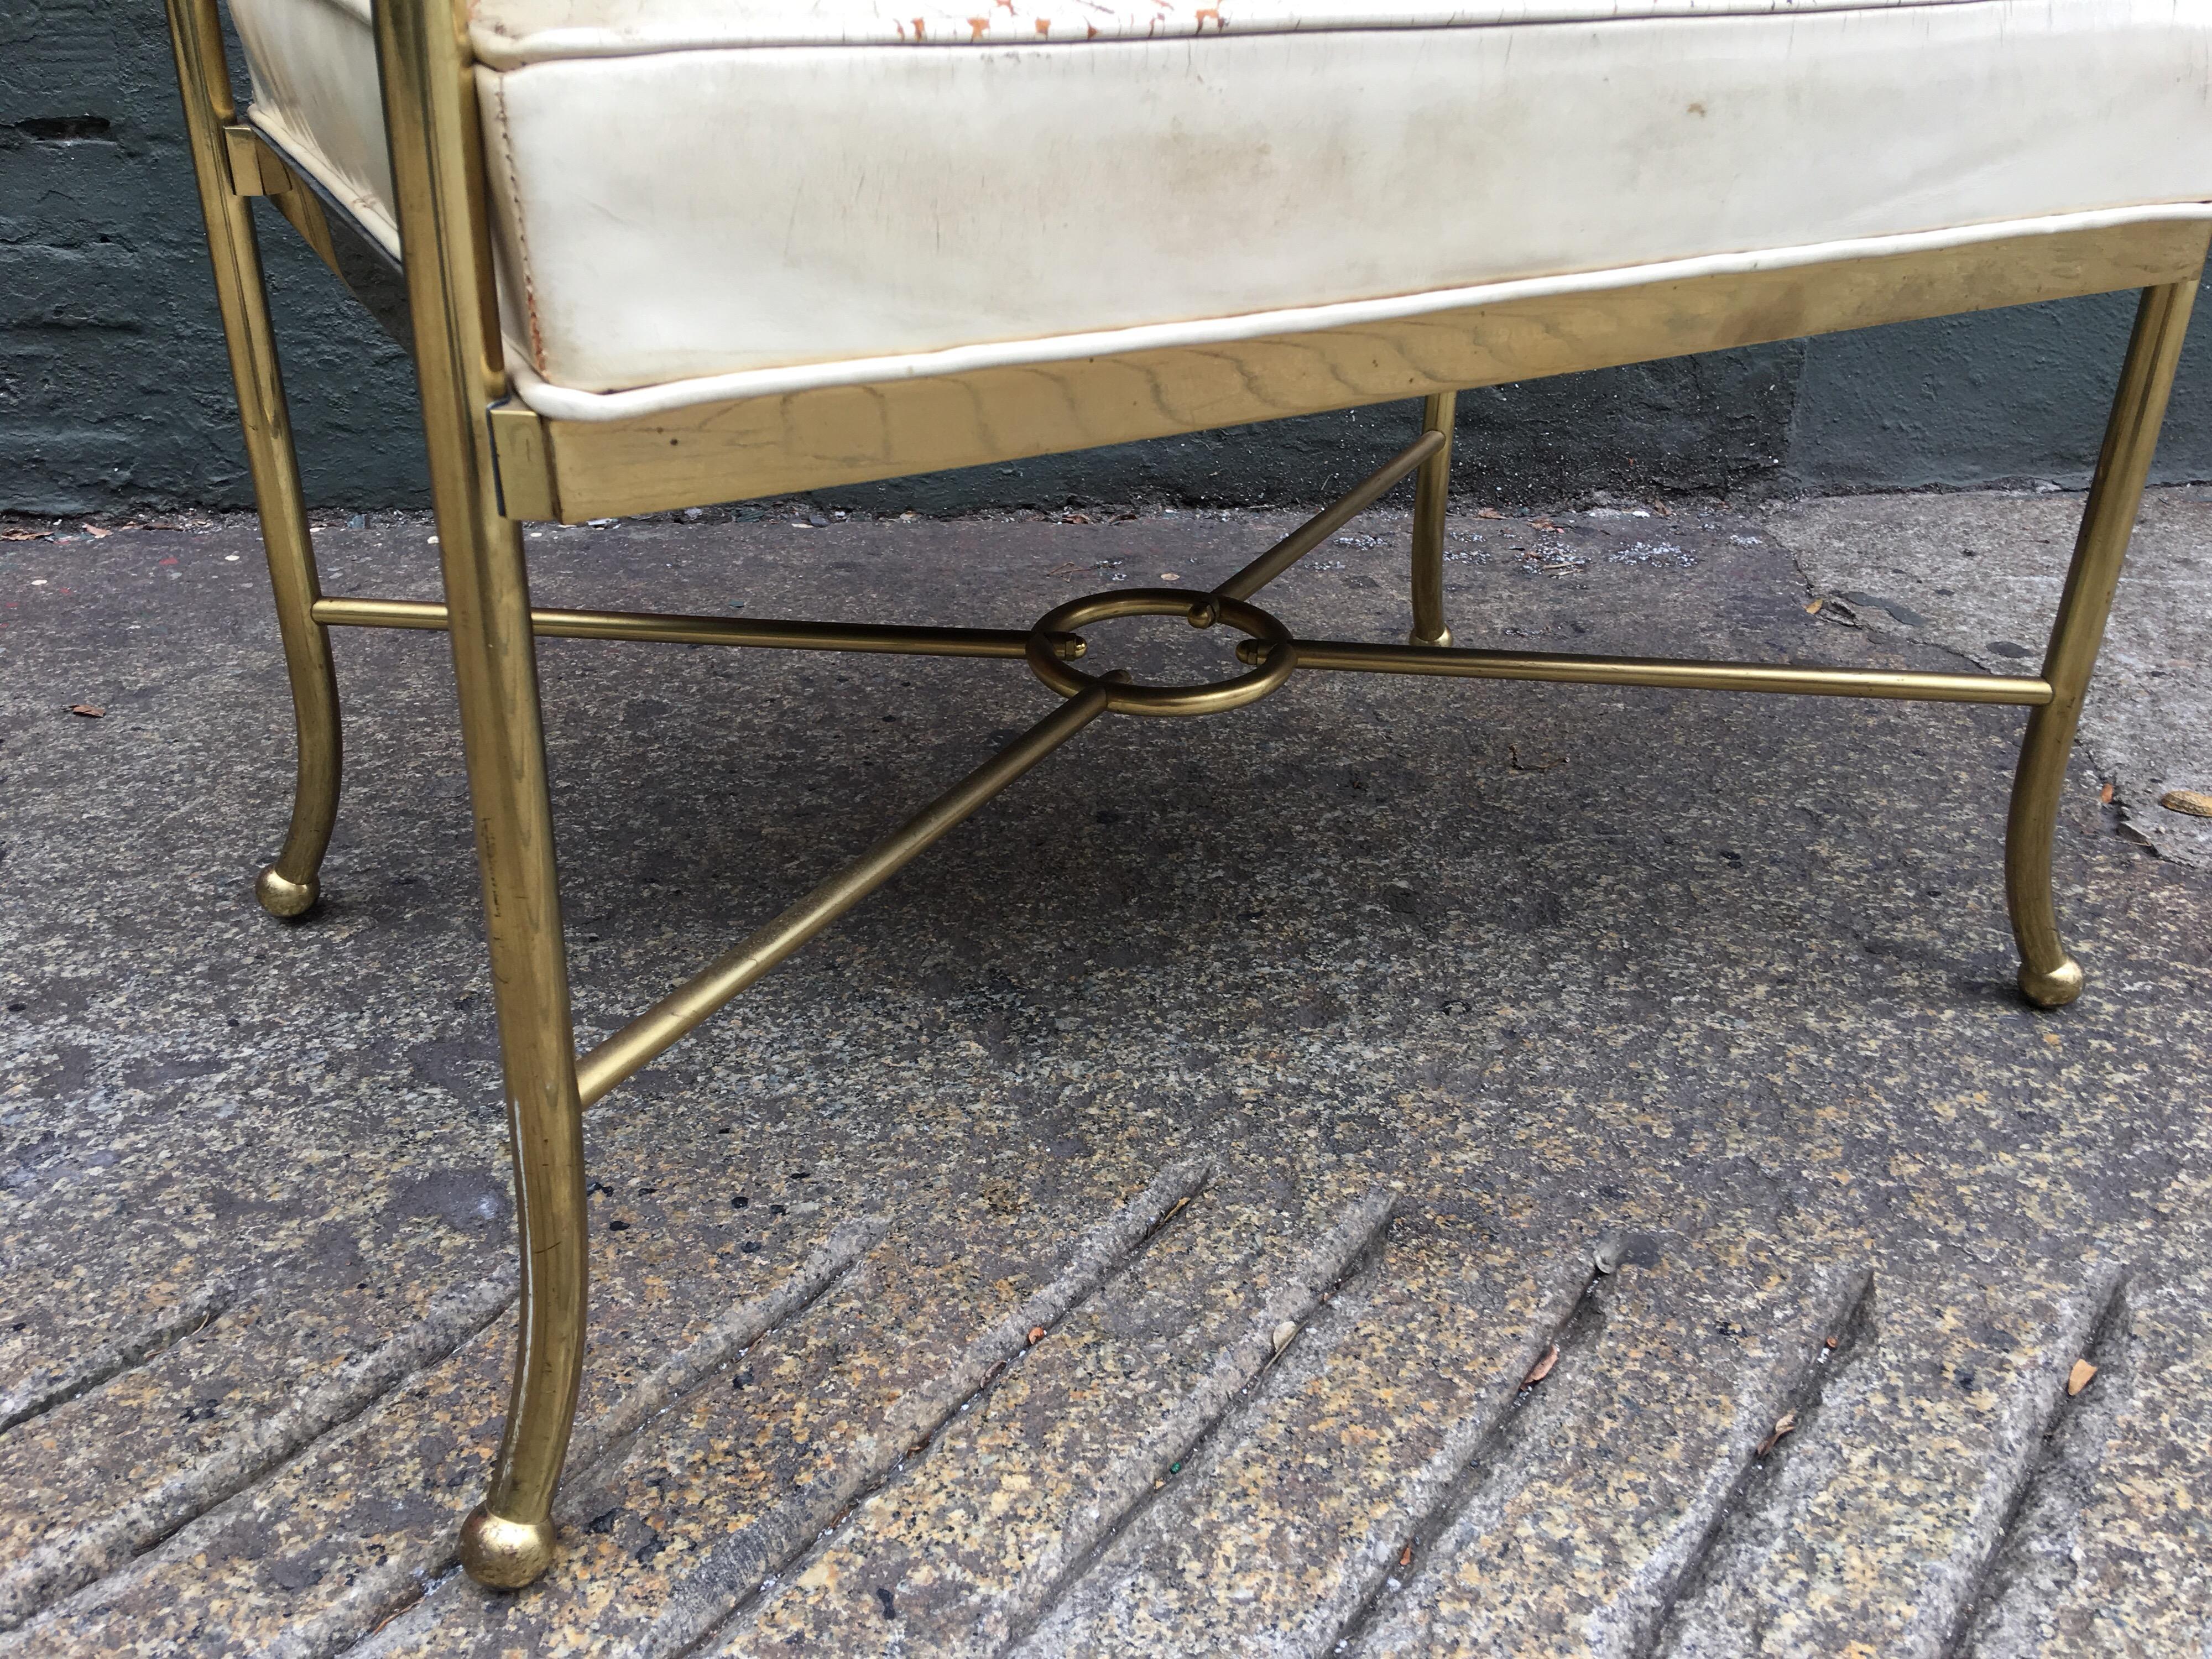 1950s brass and leather bench with original cream leather. All new foam has been replaced on seat cushion while preserving the patina of the leather. Brass stretchers with center circle.